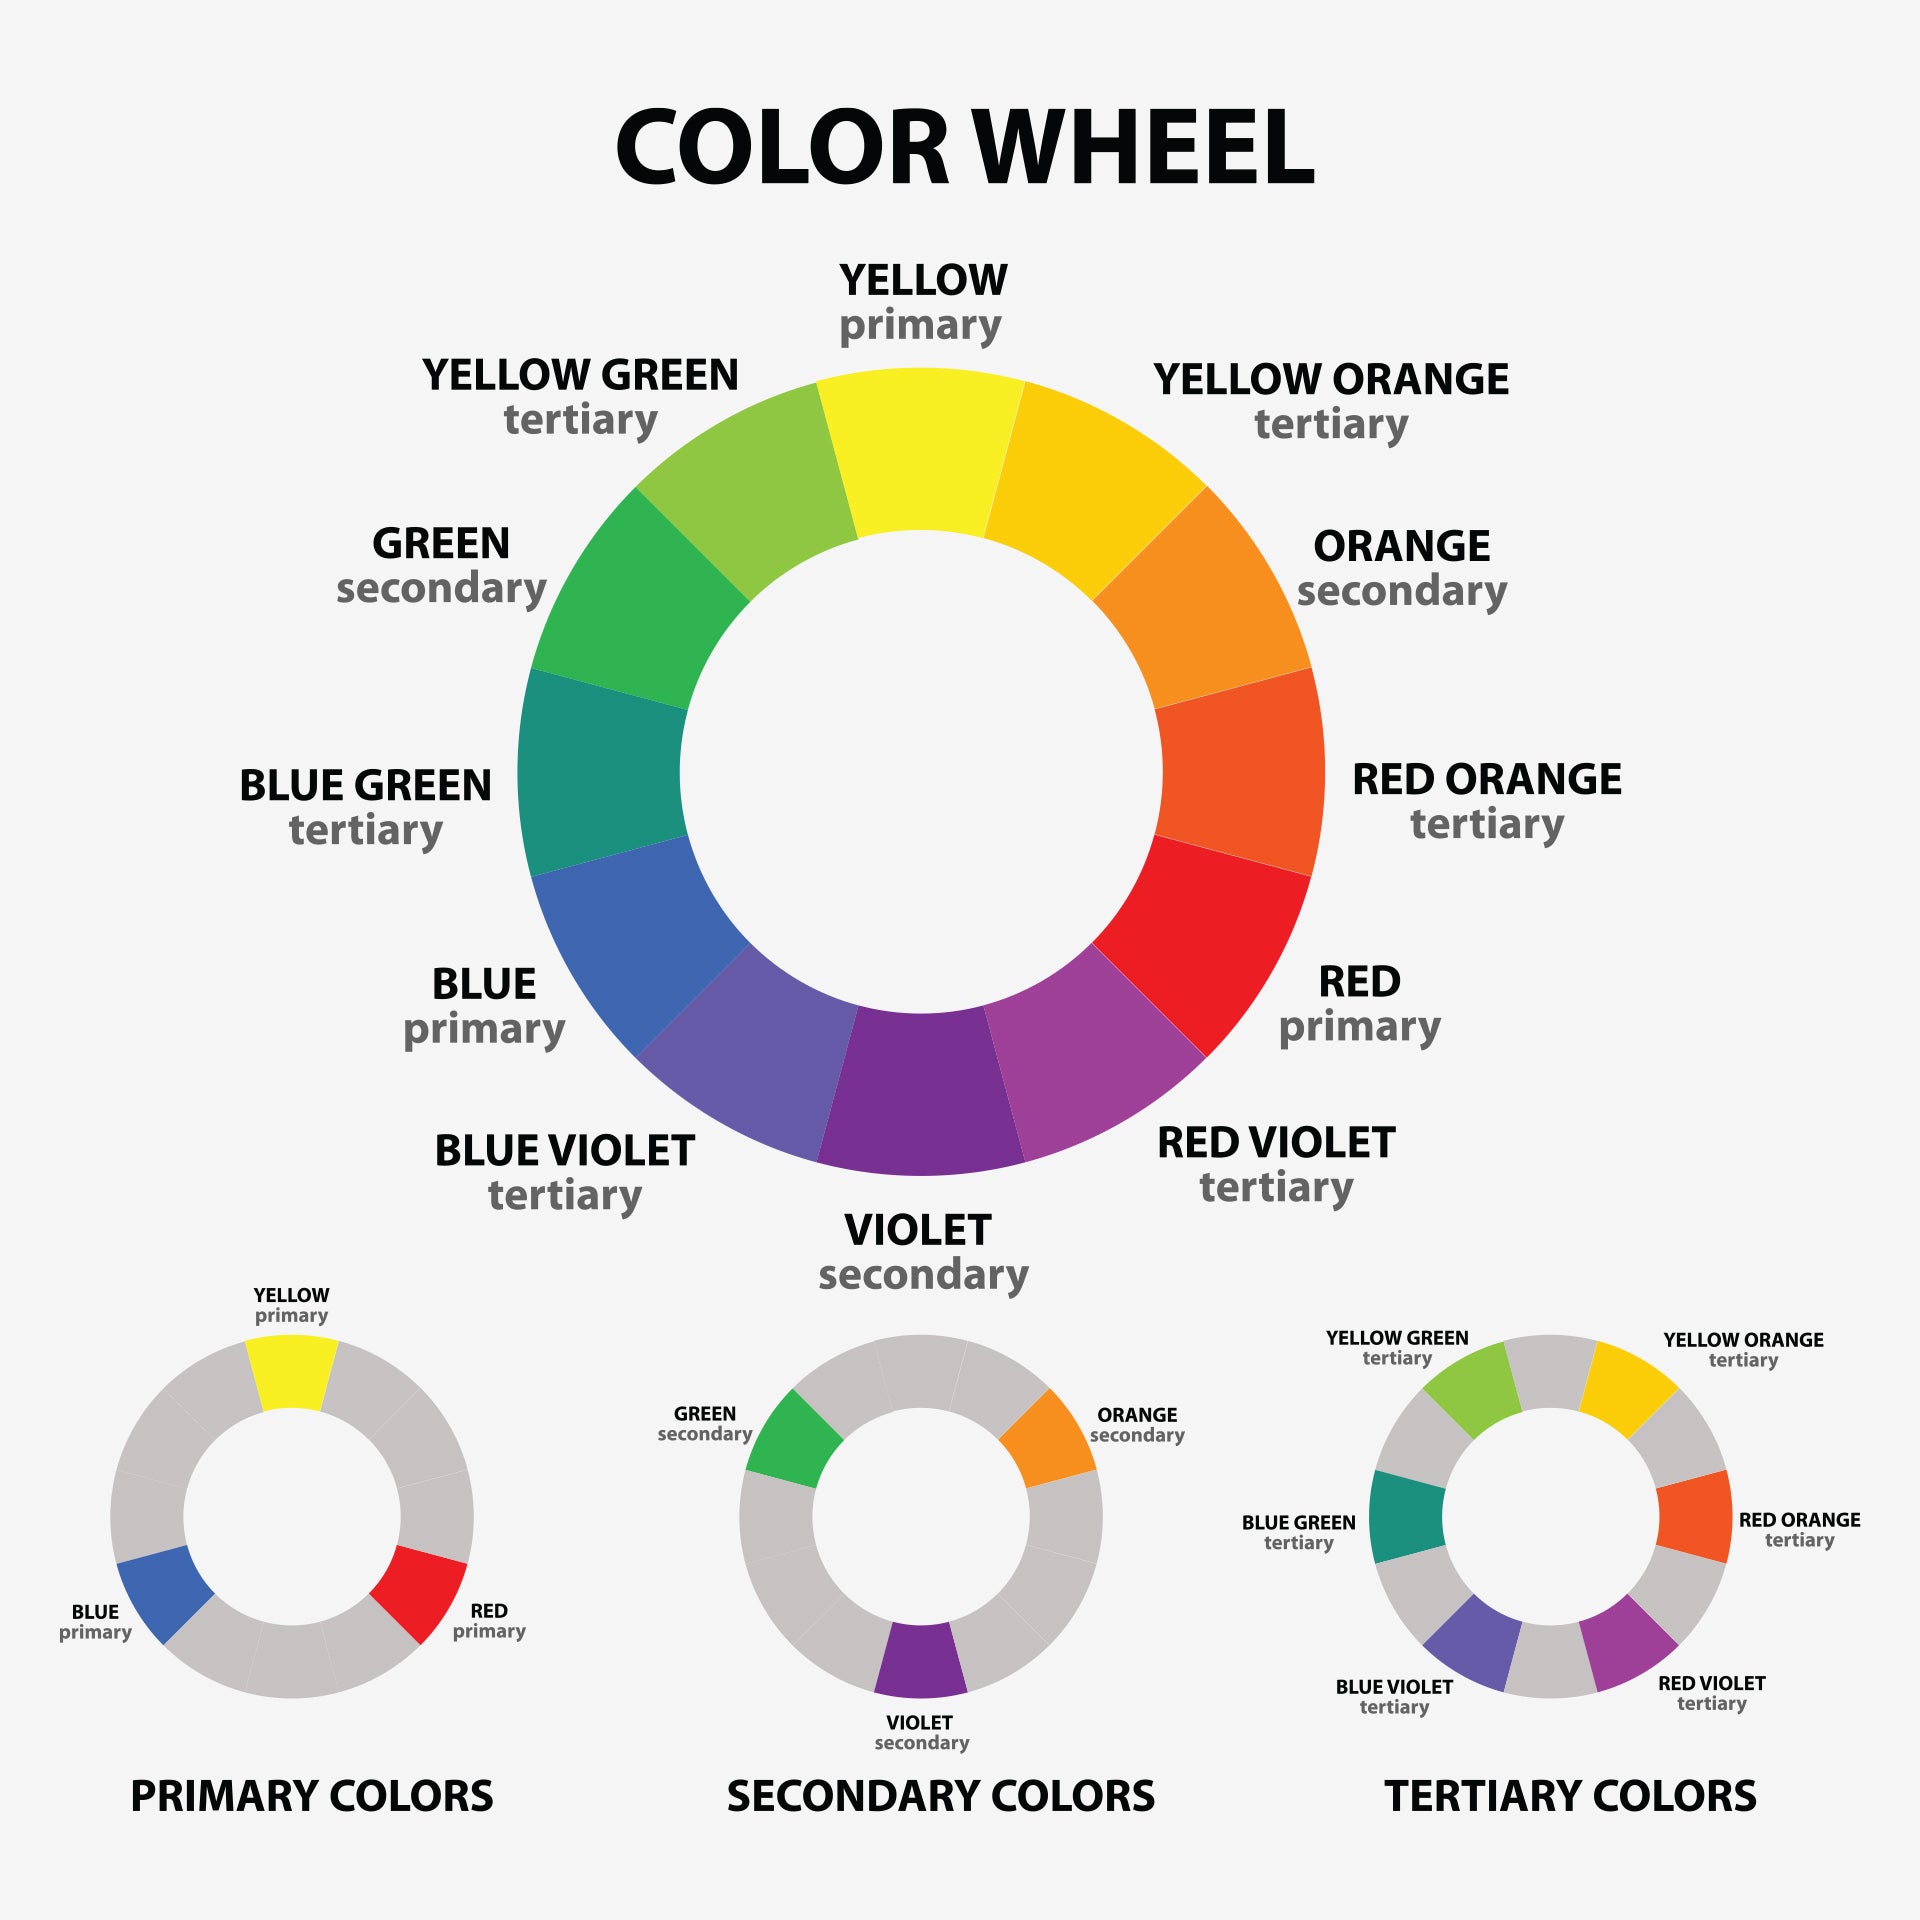 How to Use a Color Wheel to Decorate Your Room